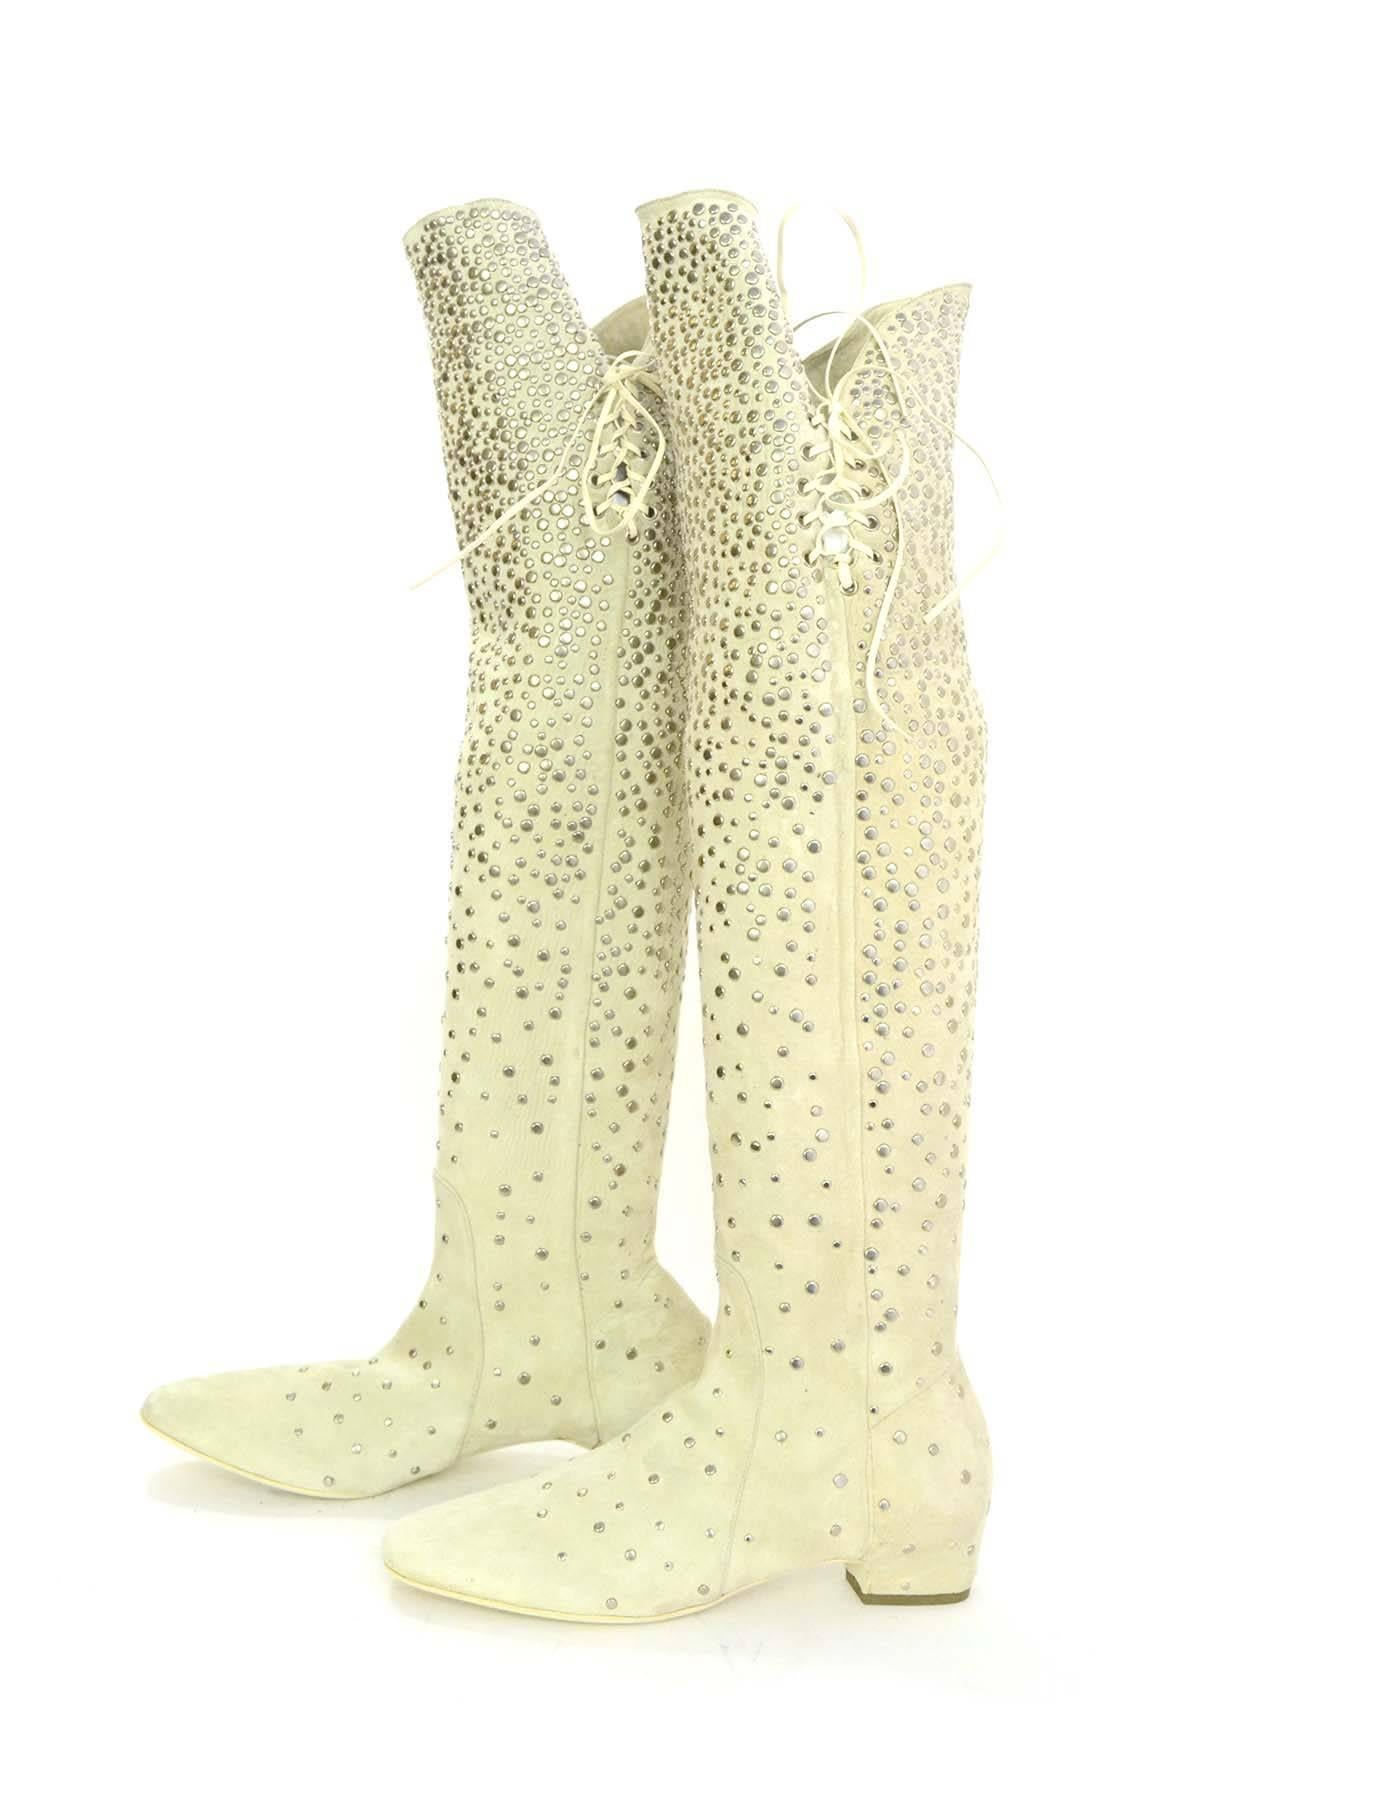 Salvatore Ferragamo Cream Suede Studded Boots Sz 37
Features lace tie at sides and silvertone studding throughout

Made In: Italy
Color: Cream
Materials: Suede
Closure/Opening: Pull on with tie closure at sides
Sole Stamp: Salvatore Ferragamo